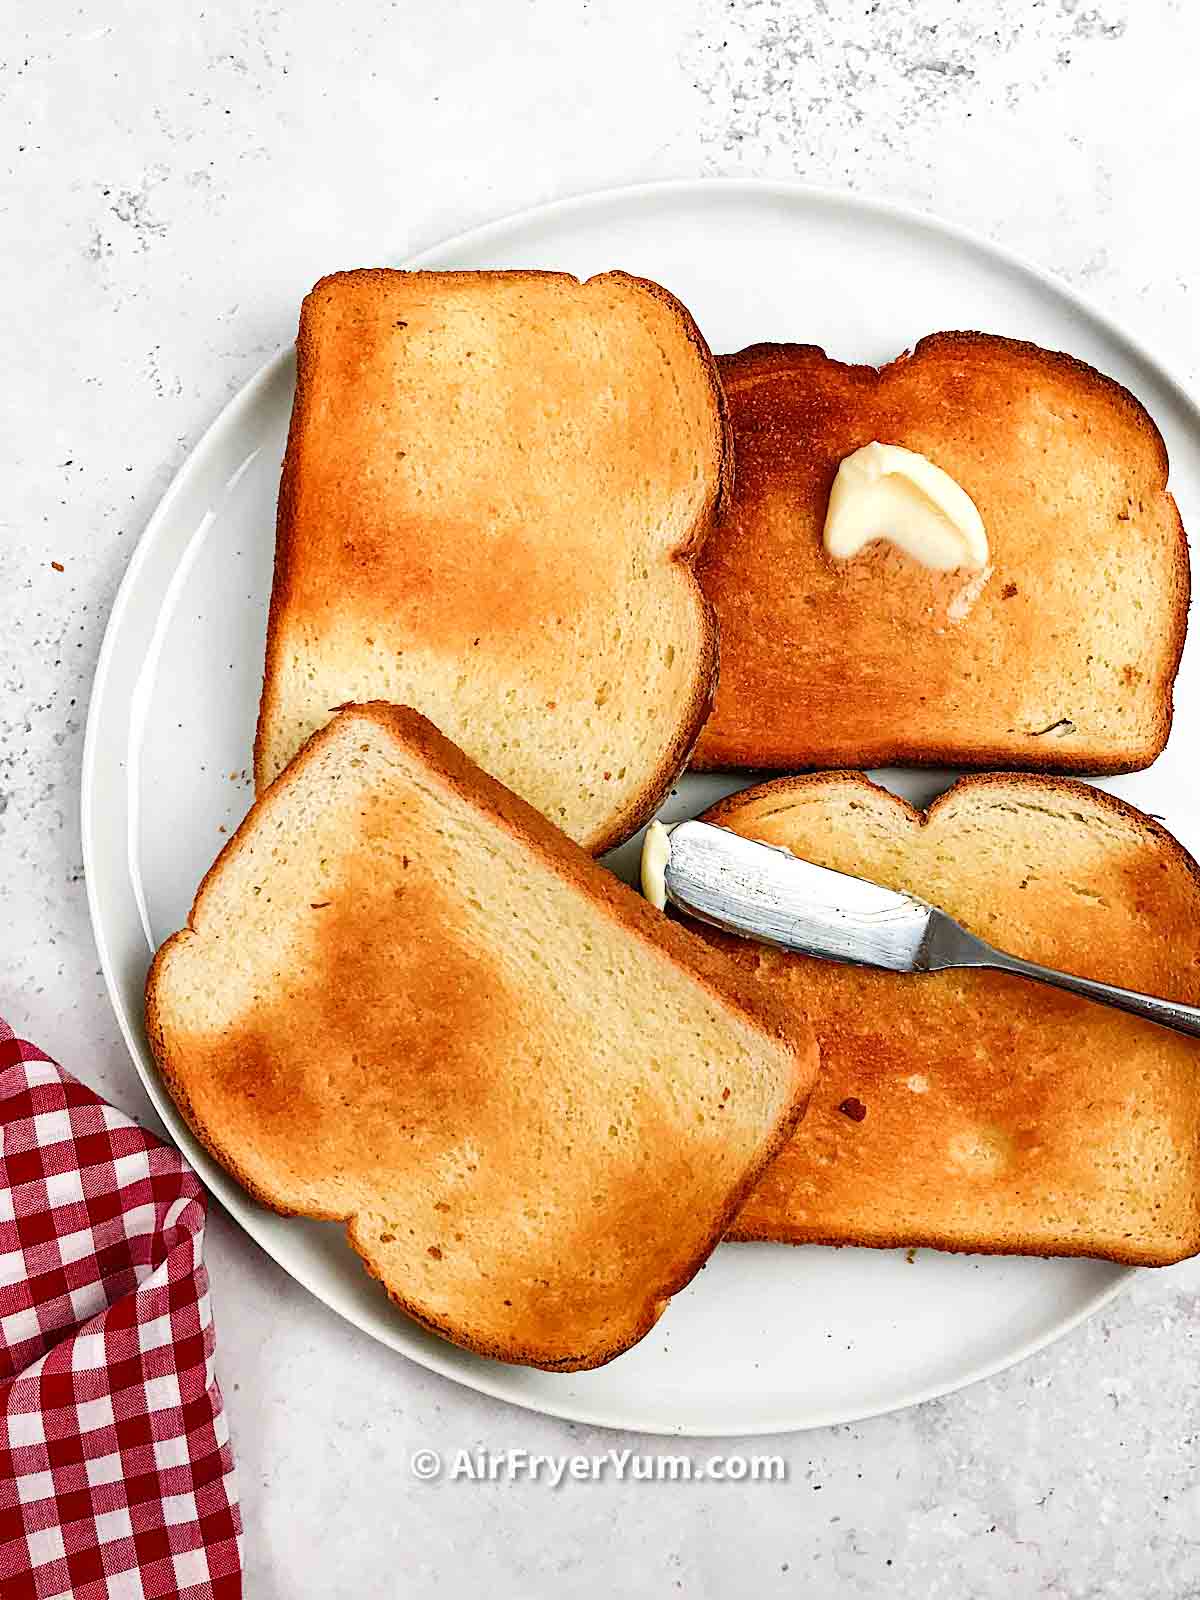 How to Toast Bread in Oven: The Toaster Alternative for Perfect Toast